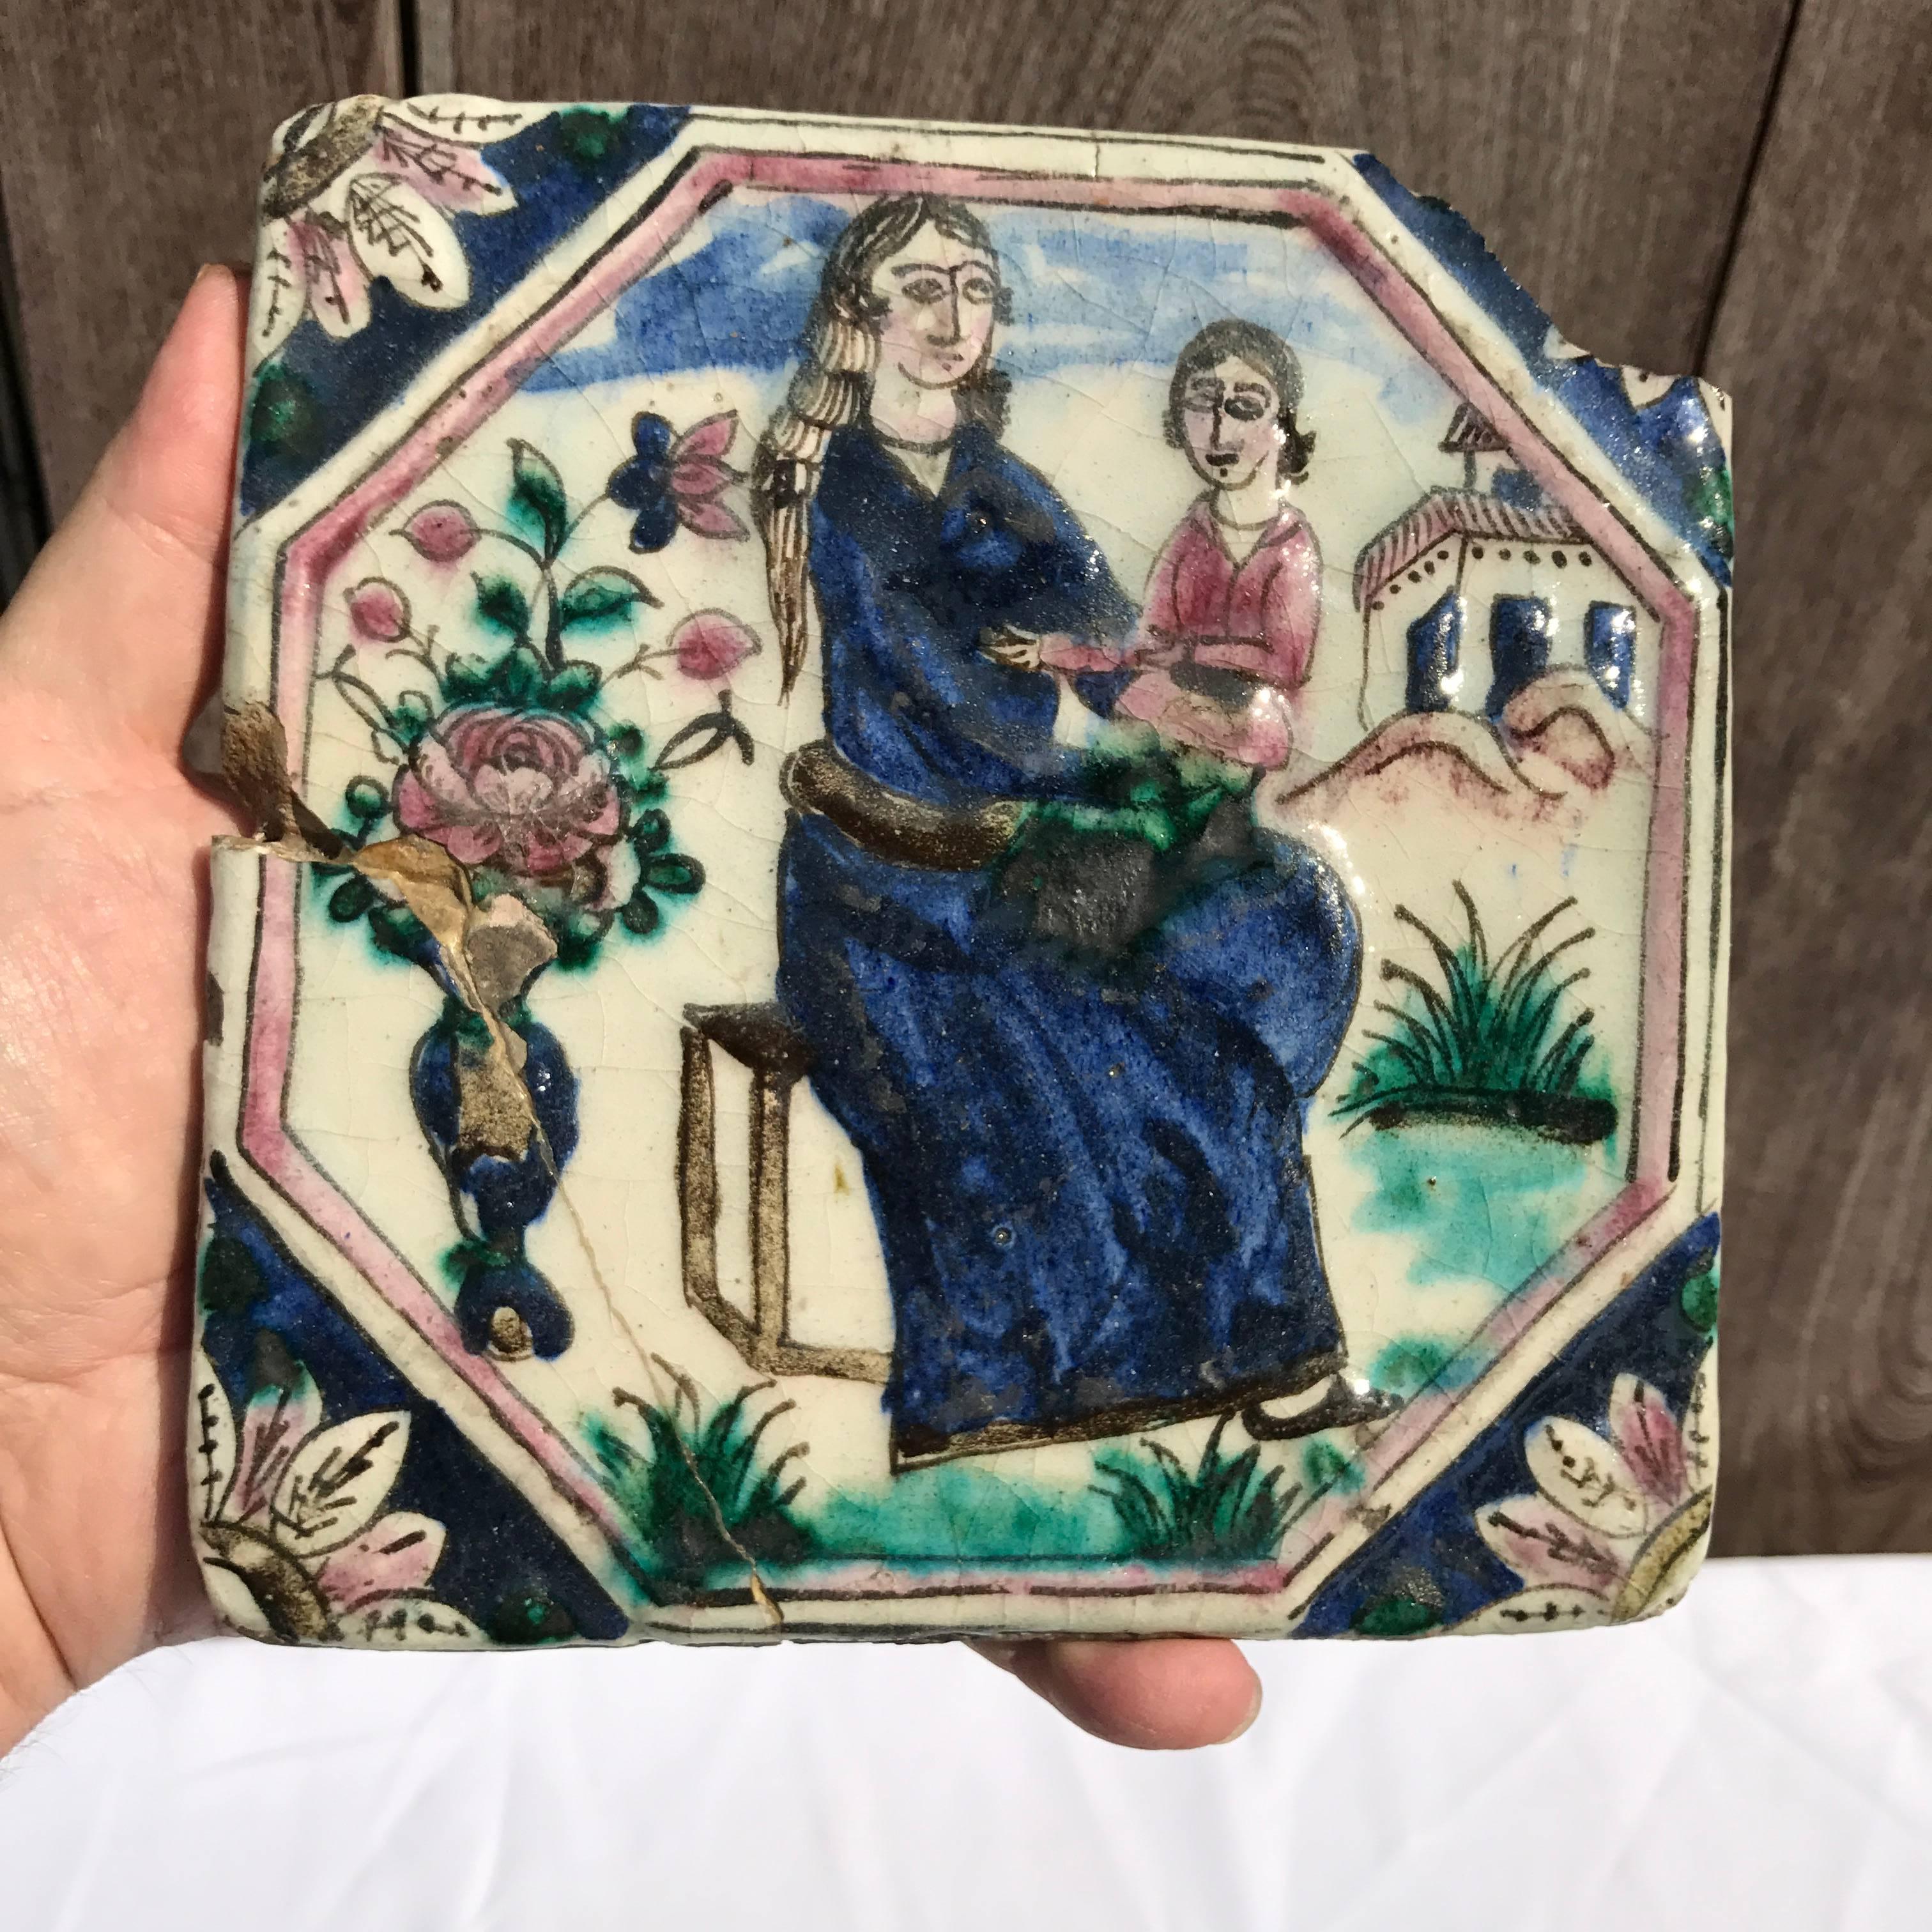 Collection of three (3) large antique hand-painted Persian Ceramic Tiles dating to the later 19th century. Handsome images and colorful glazes. 
Each tile depicts a figure:
#1 woman and child
#2 woman on horse back
#3 Nobleman clutching a